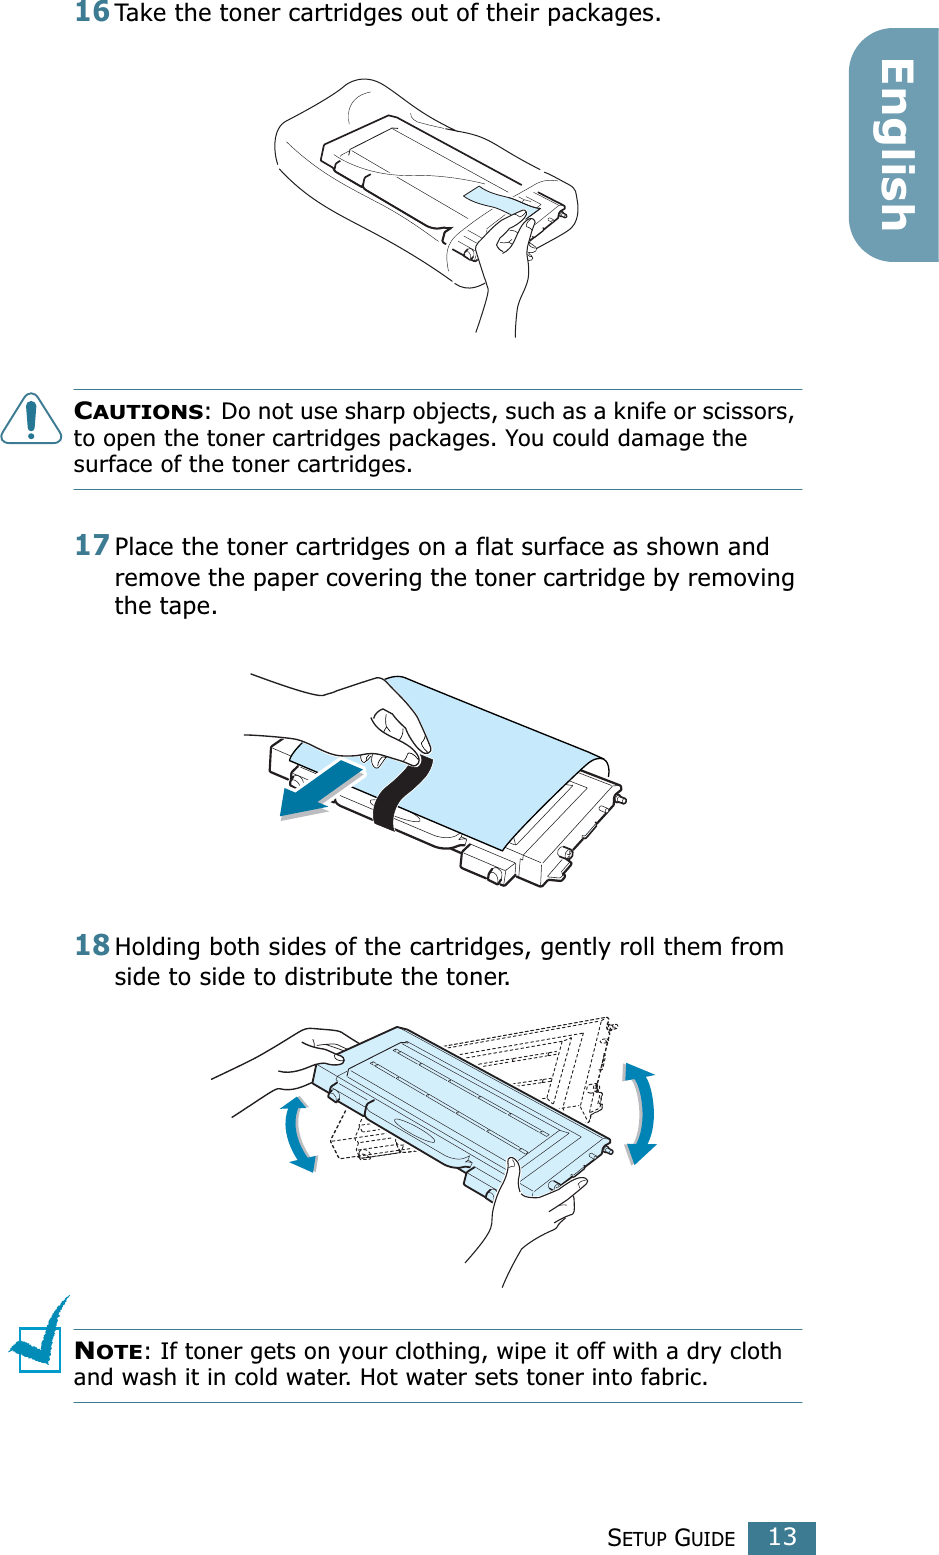 SETUP GUIDE13English16Take the toner cartridges out of their packages.CAUTIONS: Do not use sharp objects, such as a knife or scissors, to open the toner cartridges packages. You could damage the surface of the toner cartridges.17Place the toner cartridges on a flat surface as shown and remove the paper covering the toner cartridge by removing the tape.18Holding both sides of the cartridges, gently roll them from side to side to distribute the toner.NOTE: If toner gets on your clothing, wipe it off with a dry cloth and wash it in cold water. Hot water sets toner into fabric.